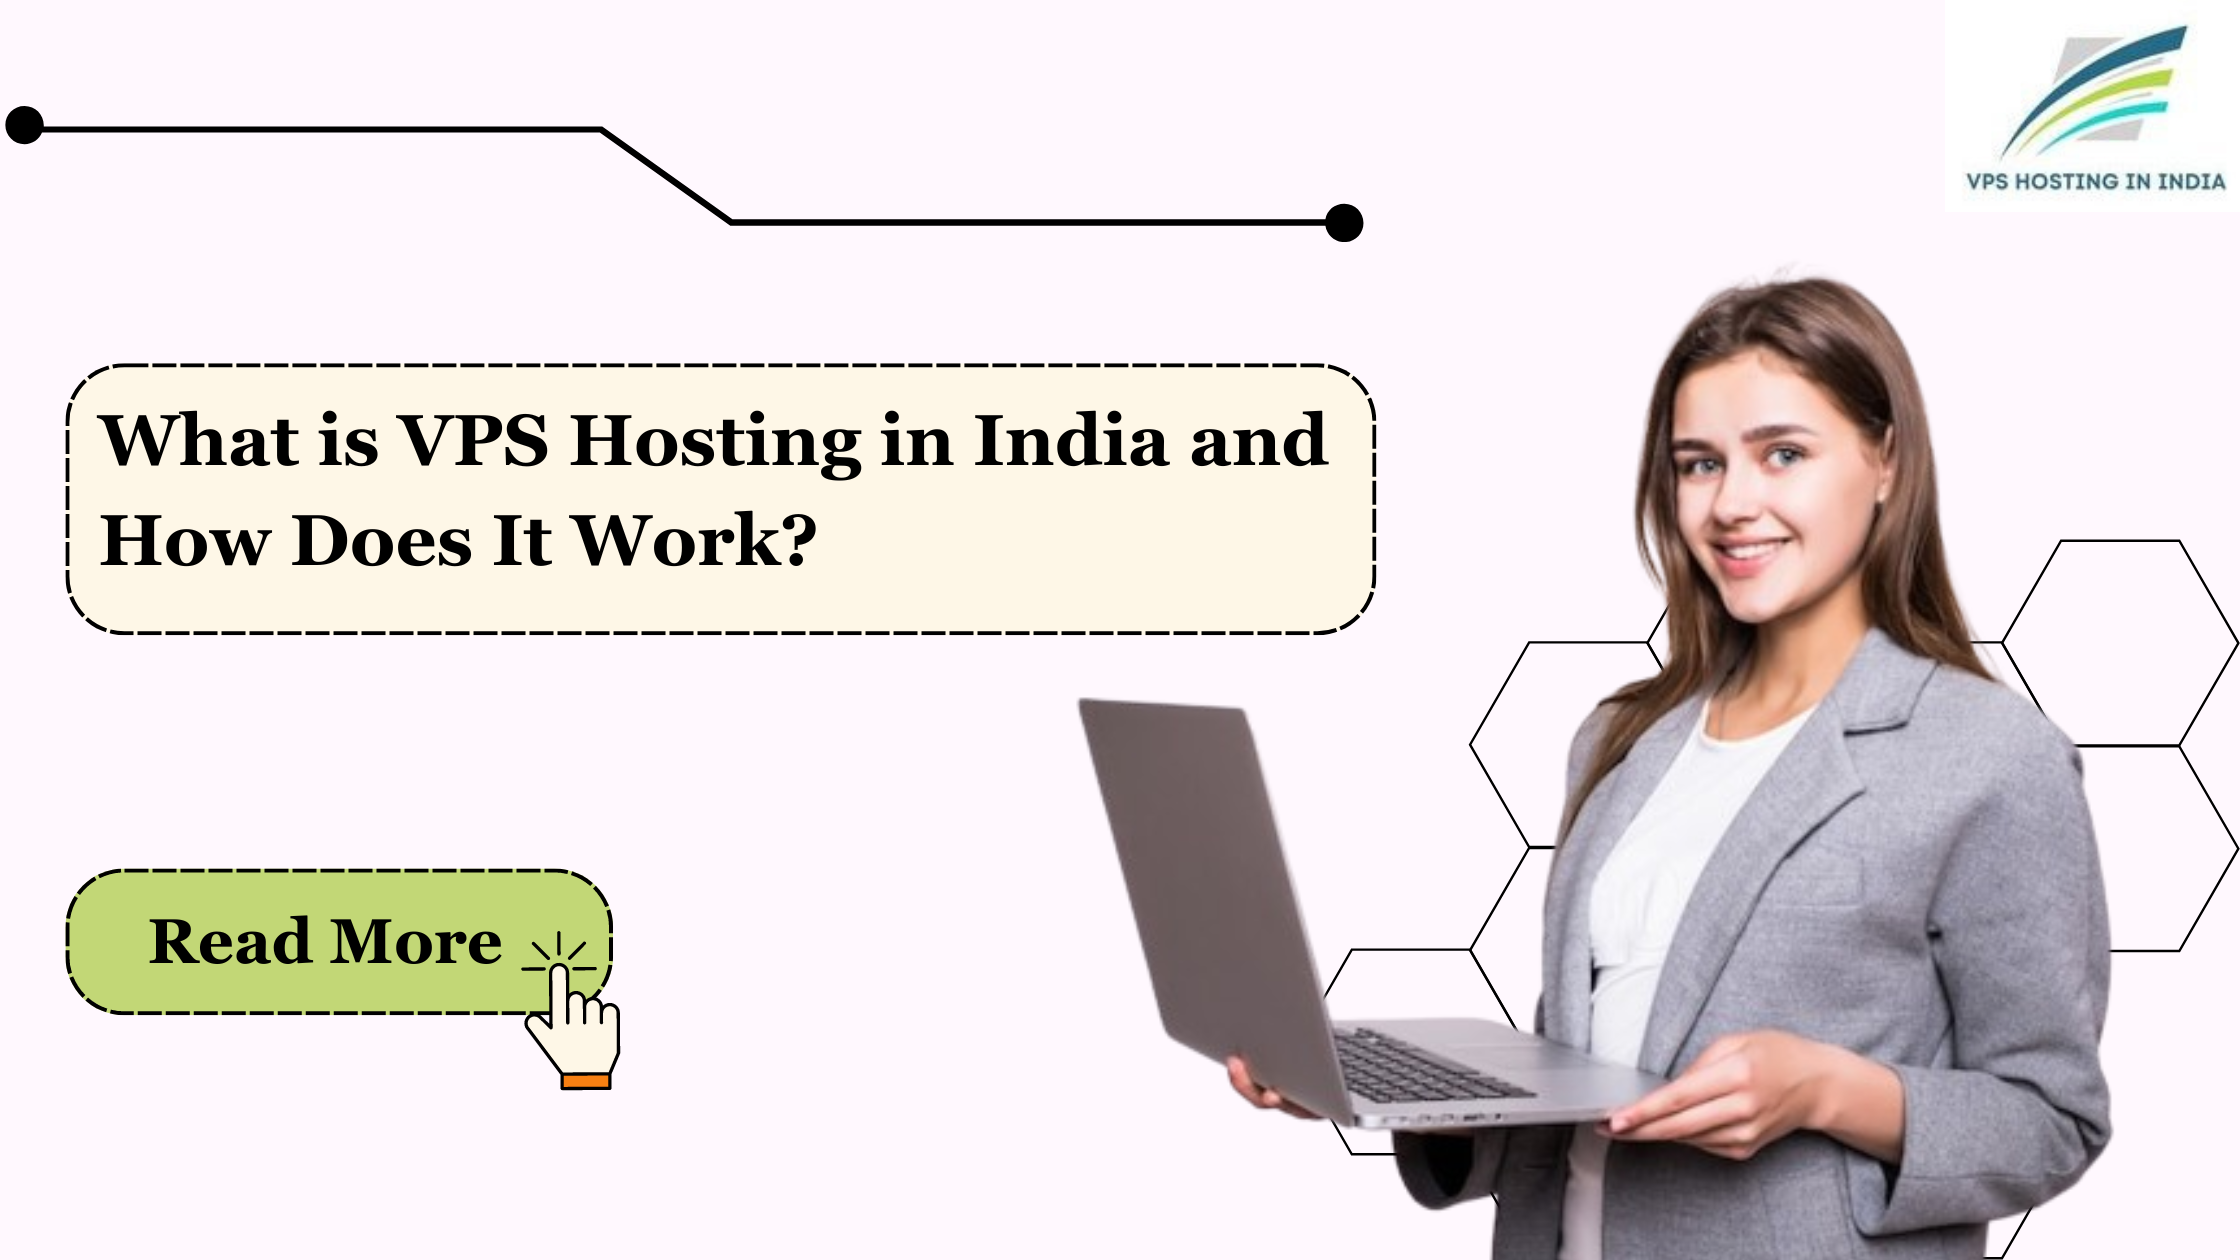 What is VPS Hosting in India and How Does It Work?